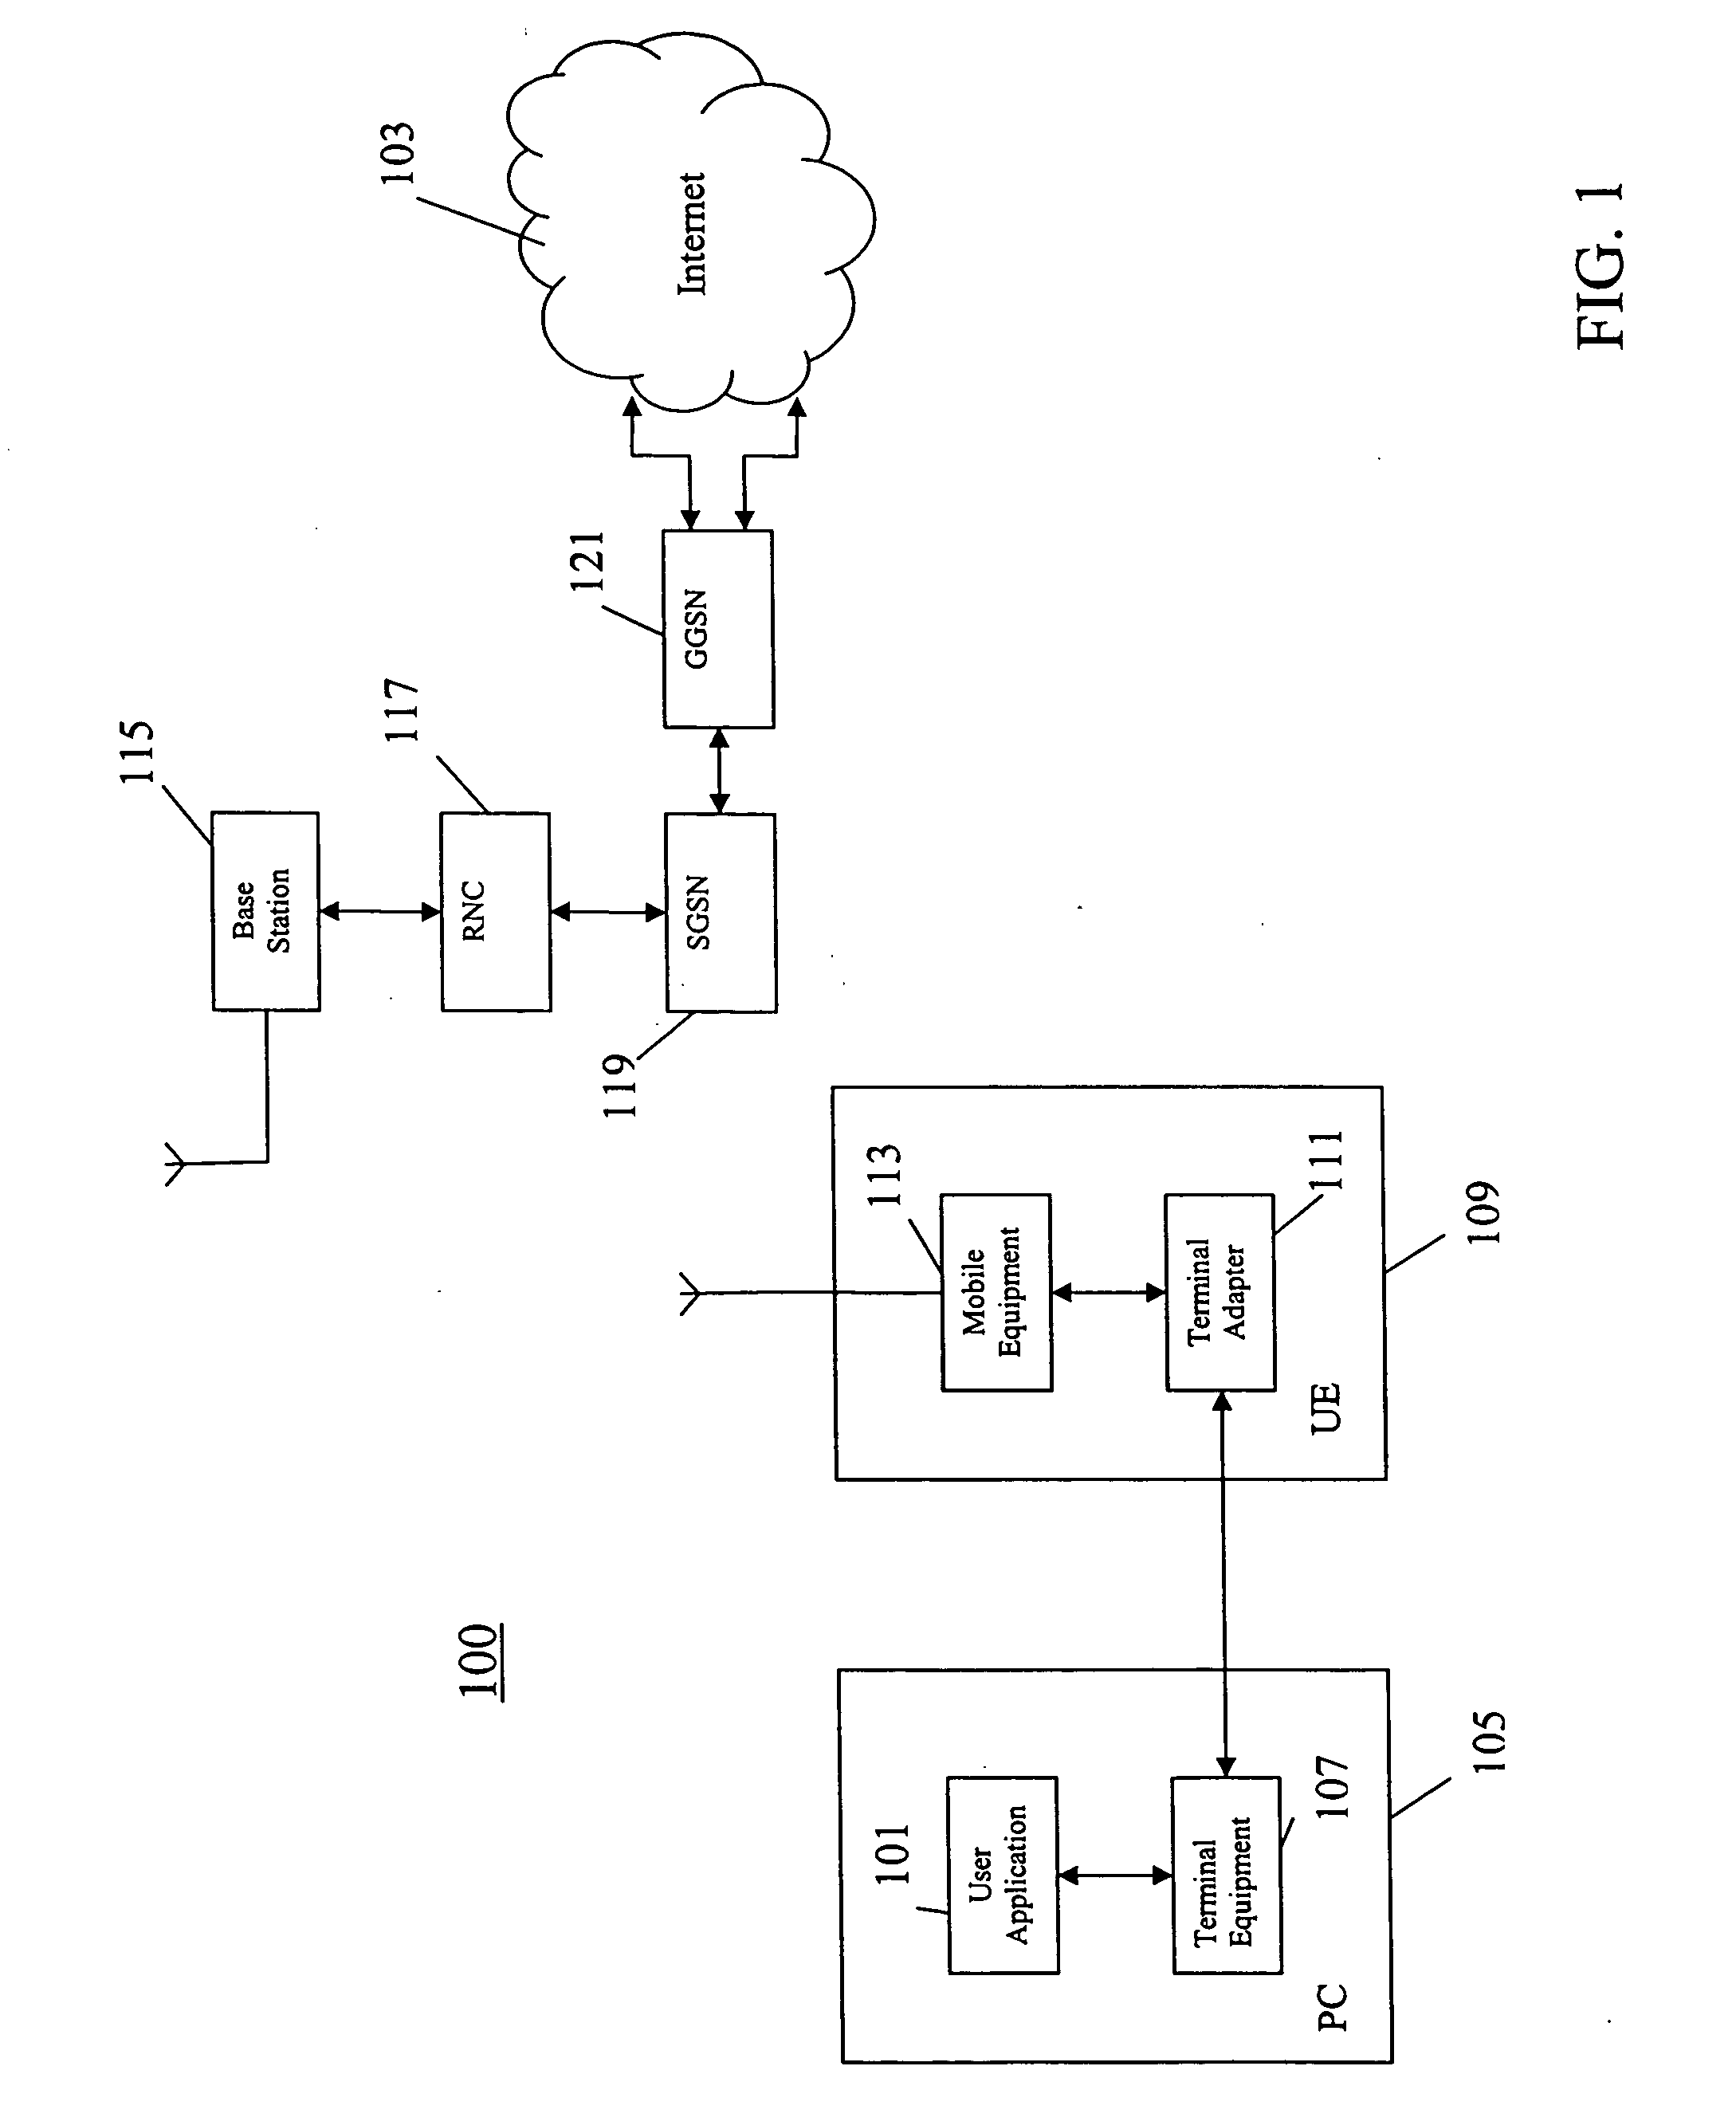 Method and apparatus for accessing a data network through a cellular communication system